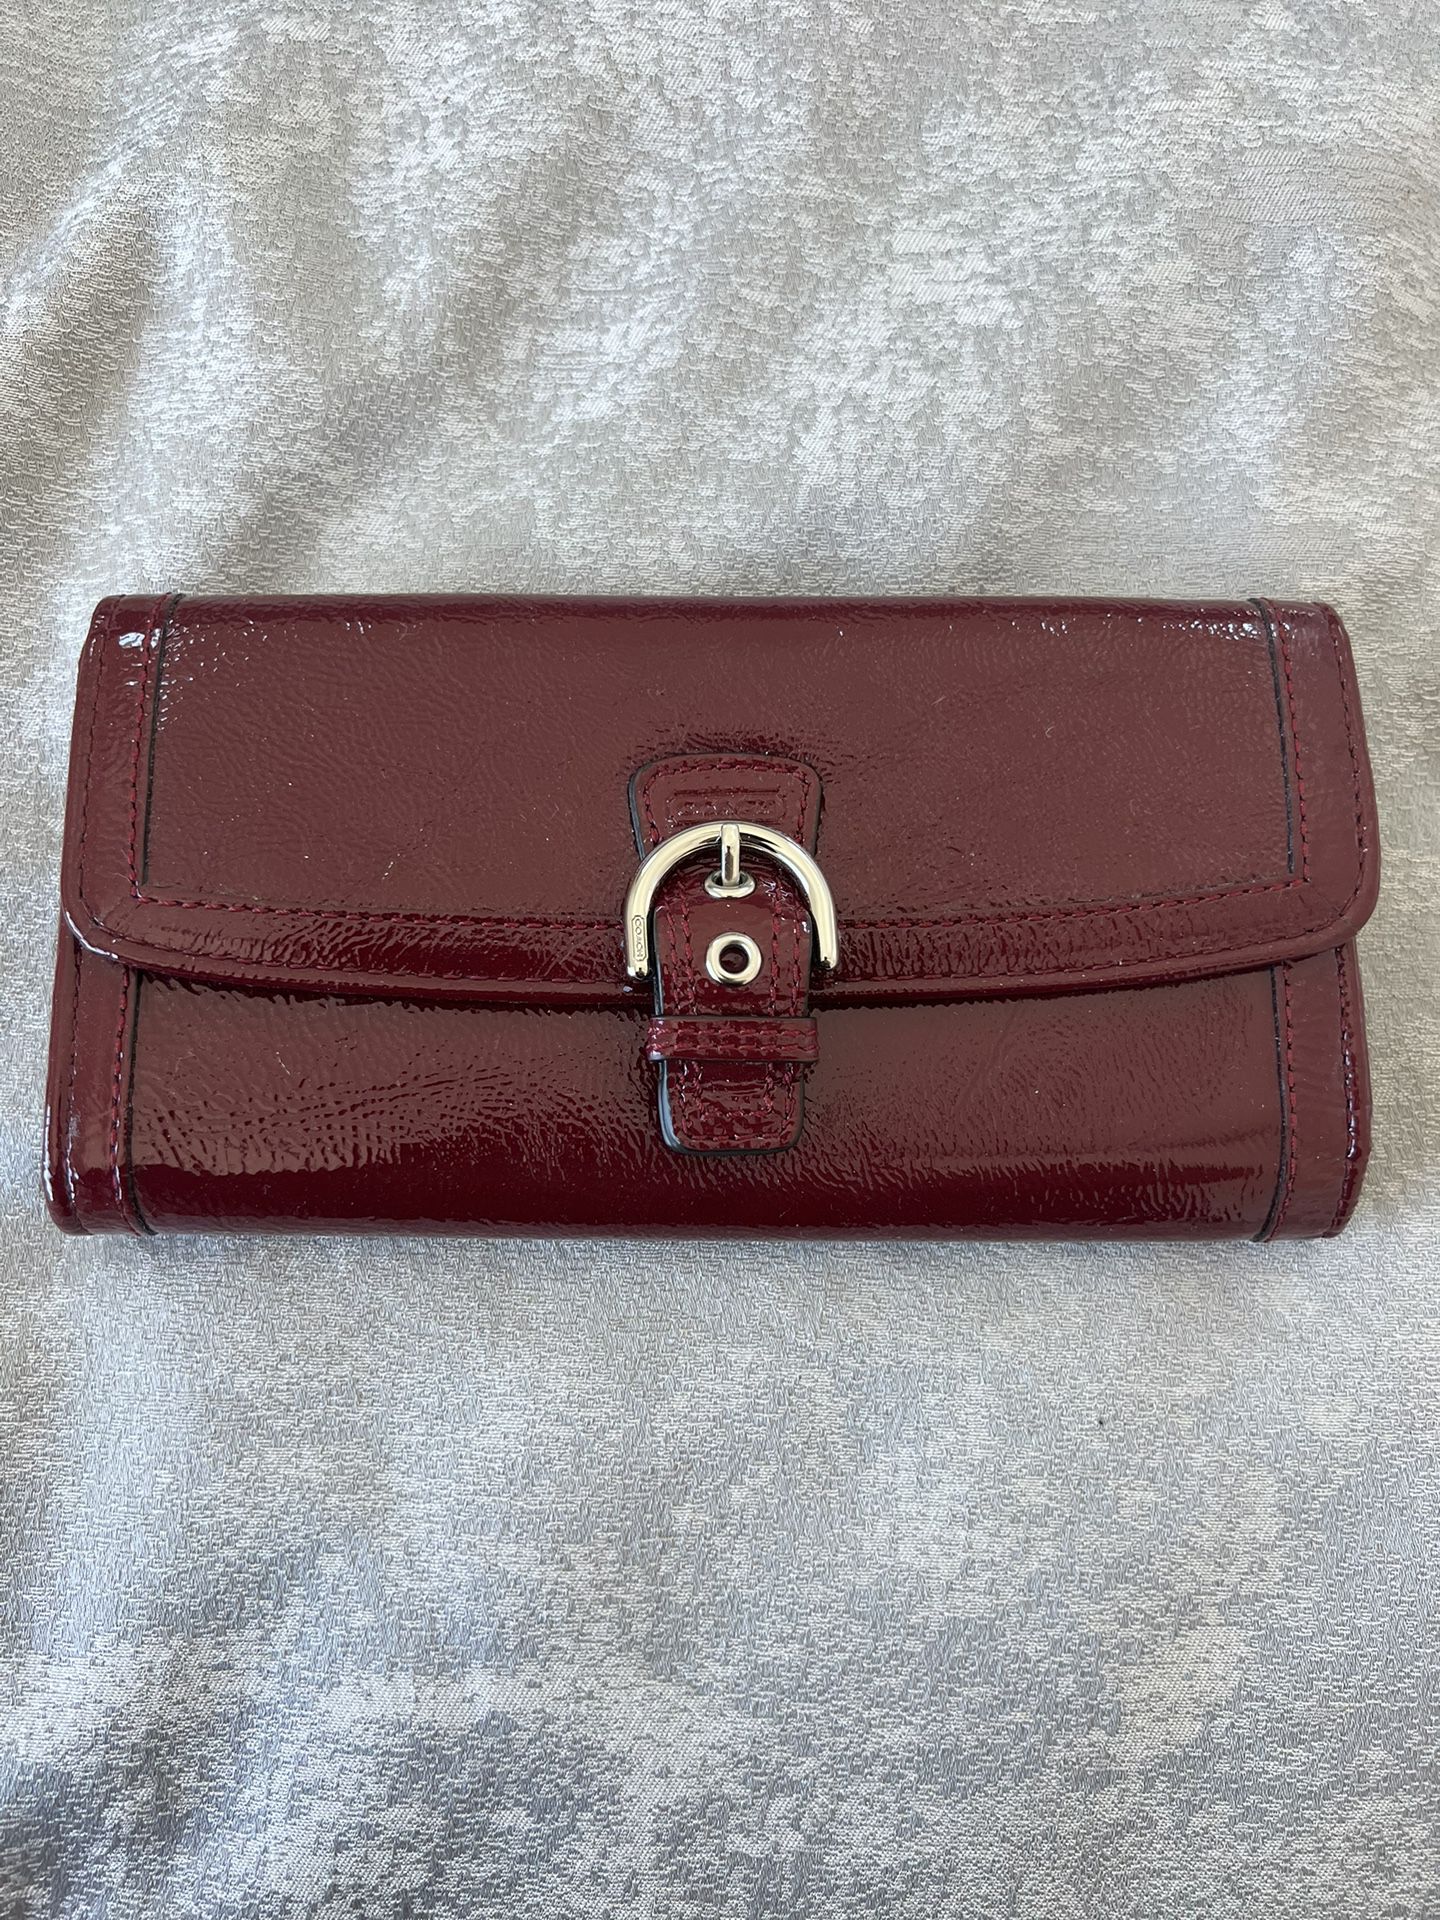 Coach Wallet- Red Patented Leather